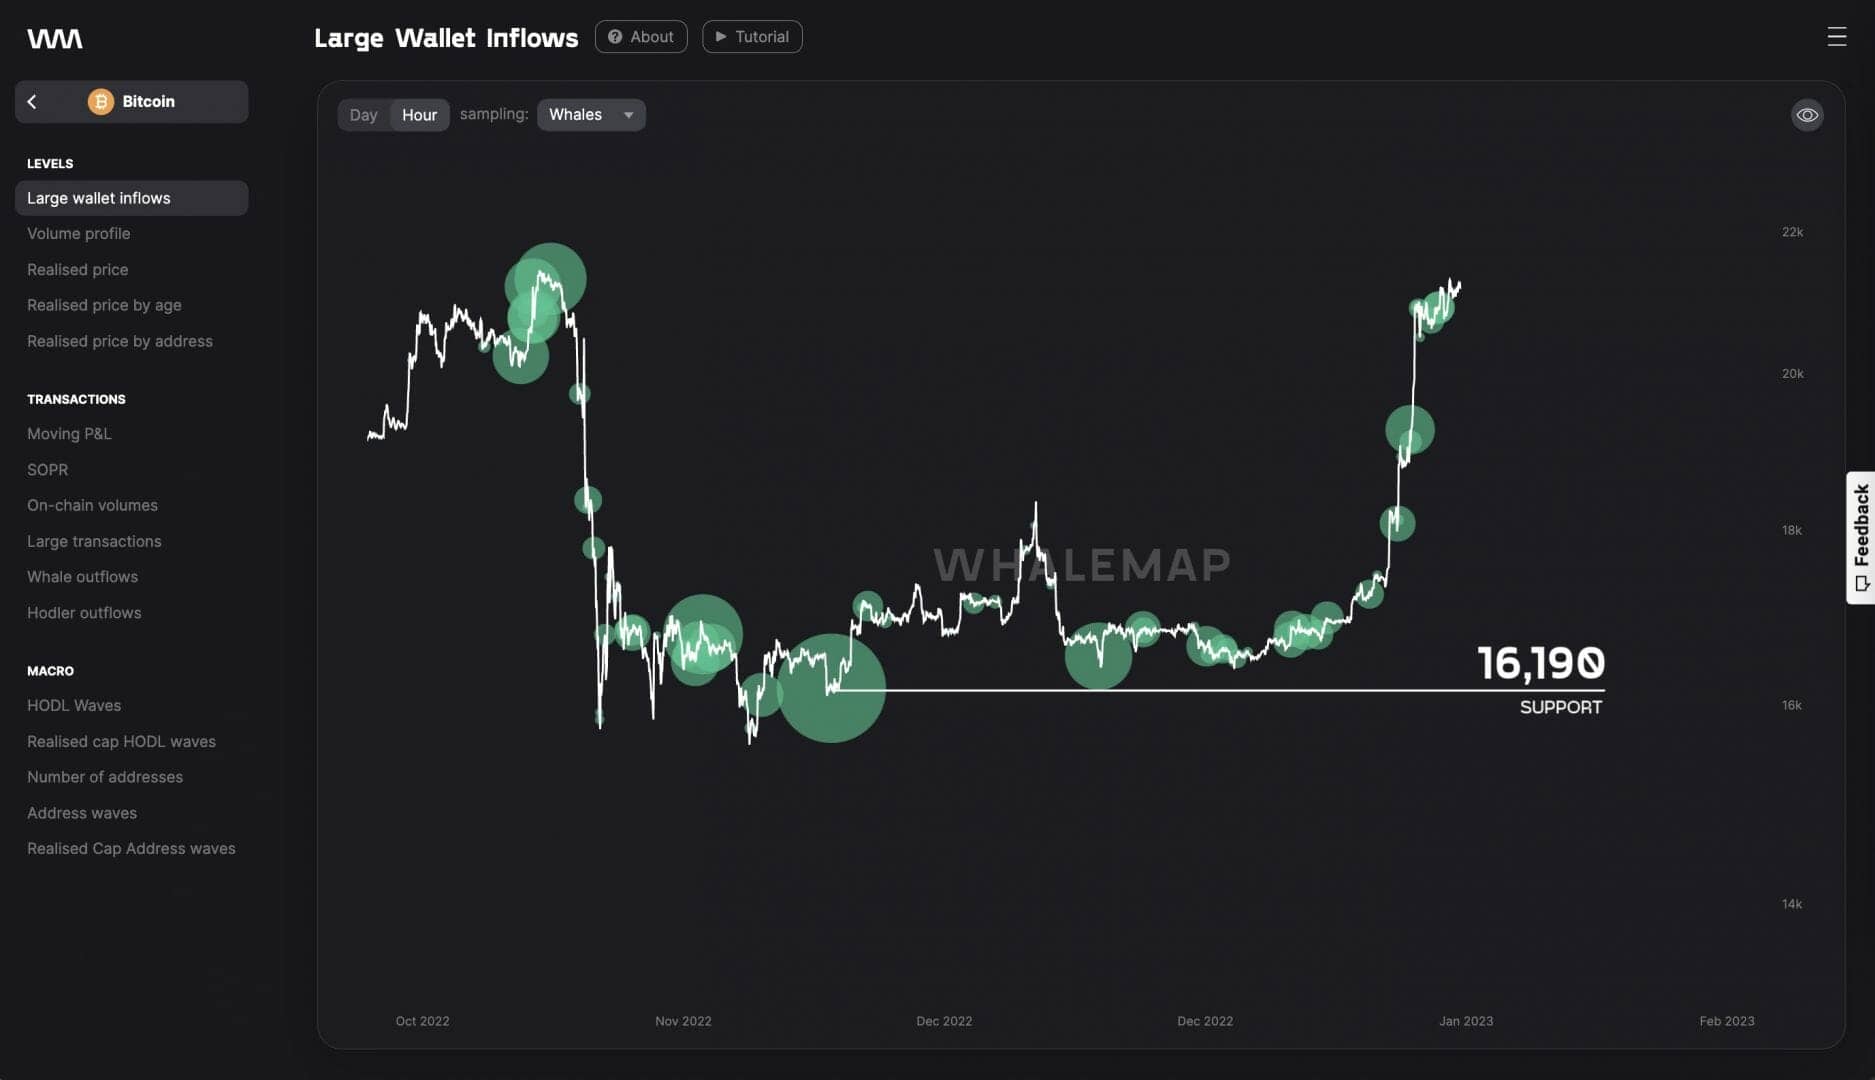 BTC price: concentration of whales